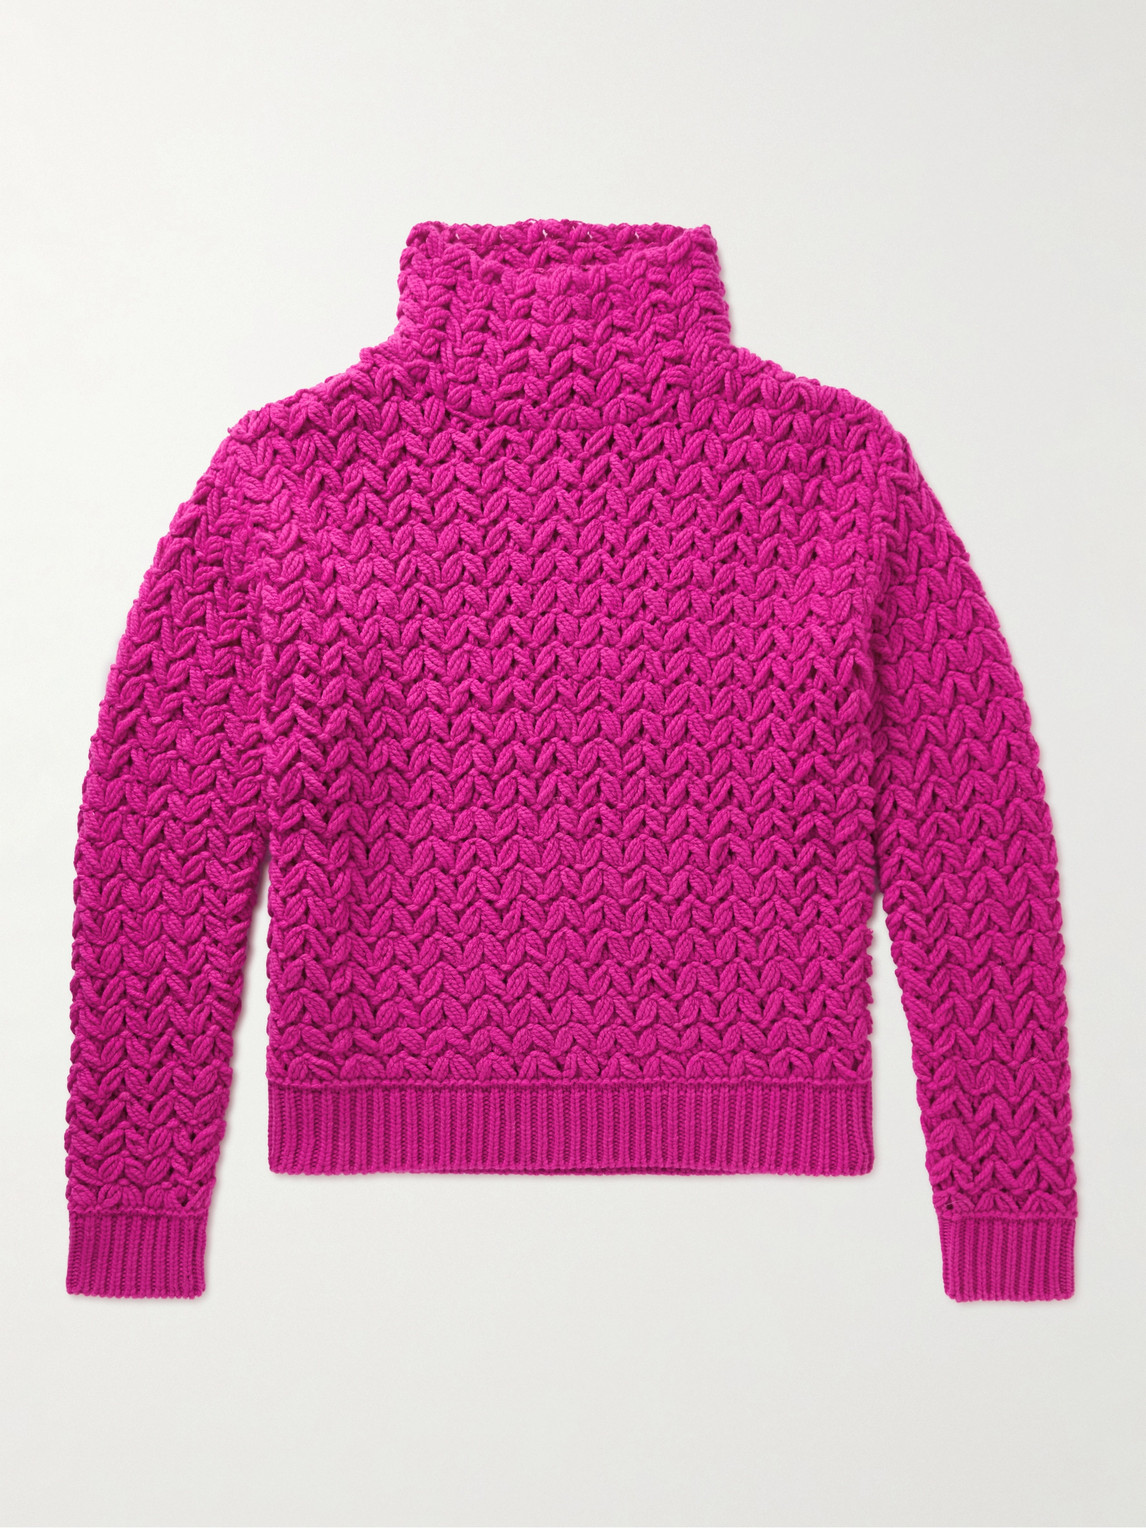 VALENTINO CROCHETED WOOL ROLLNECK SWEATER